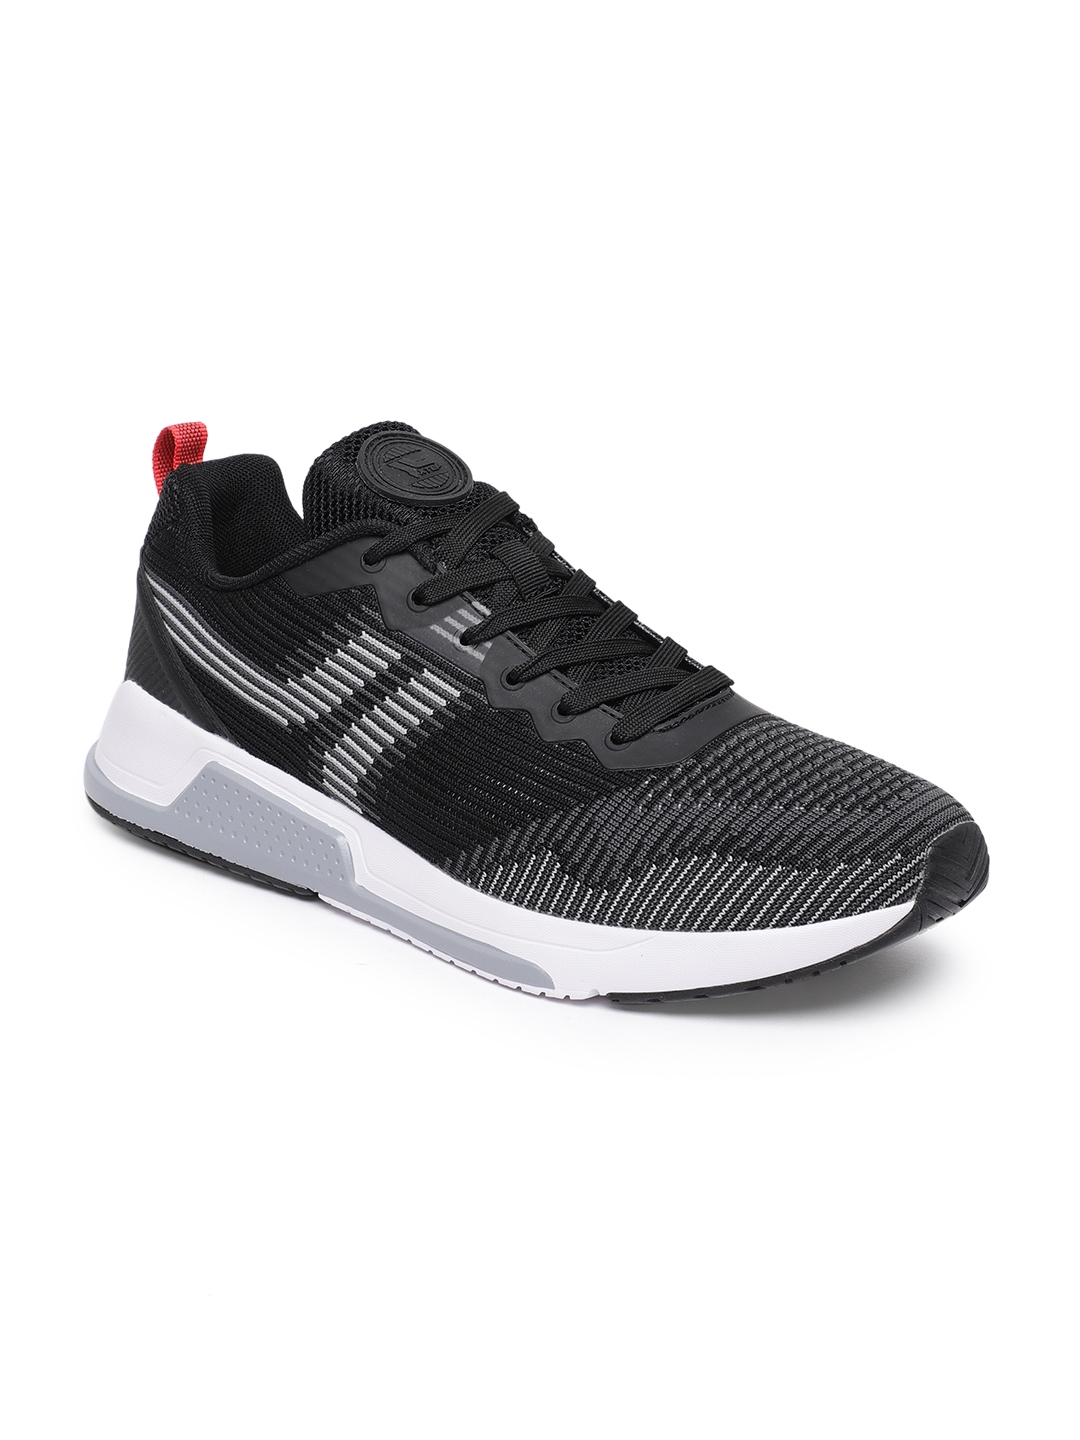 Buy Xtep Men Black Sneakers - Casual Shoes for Men 9586779 | Myntra